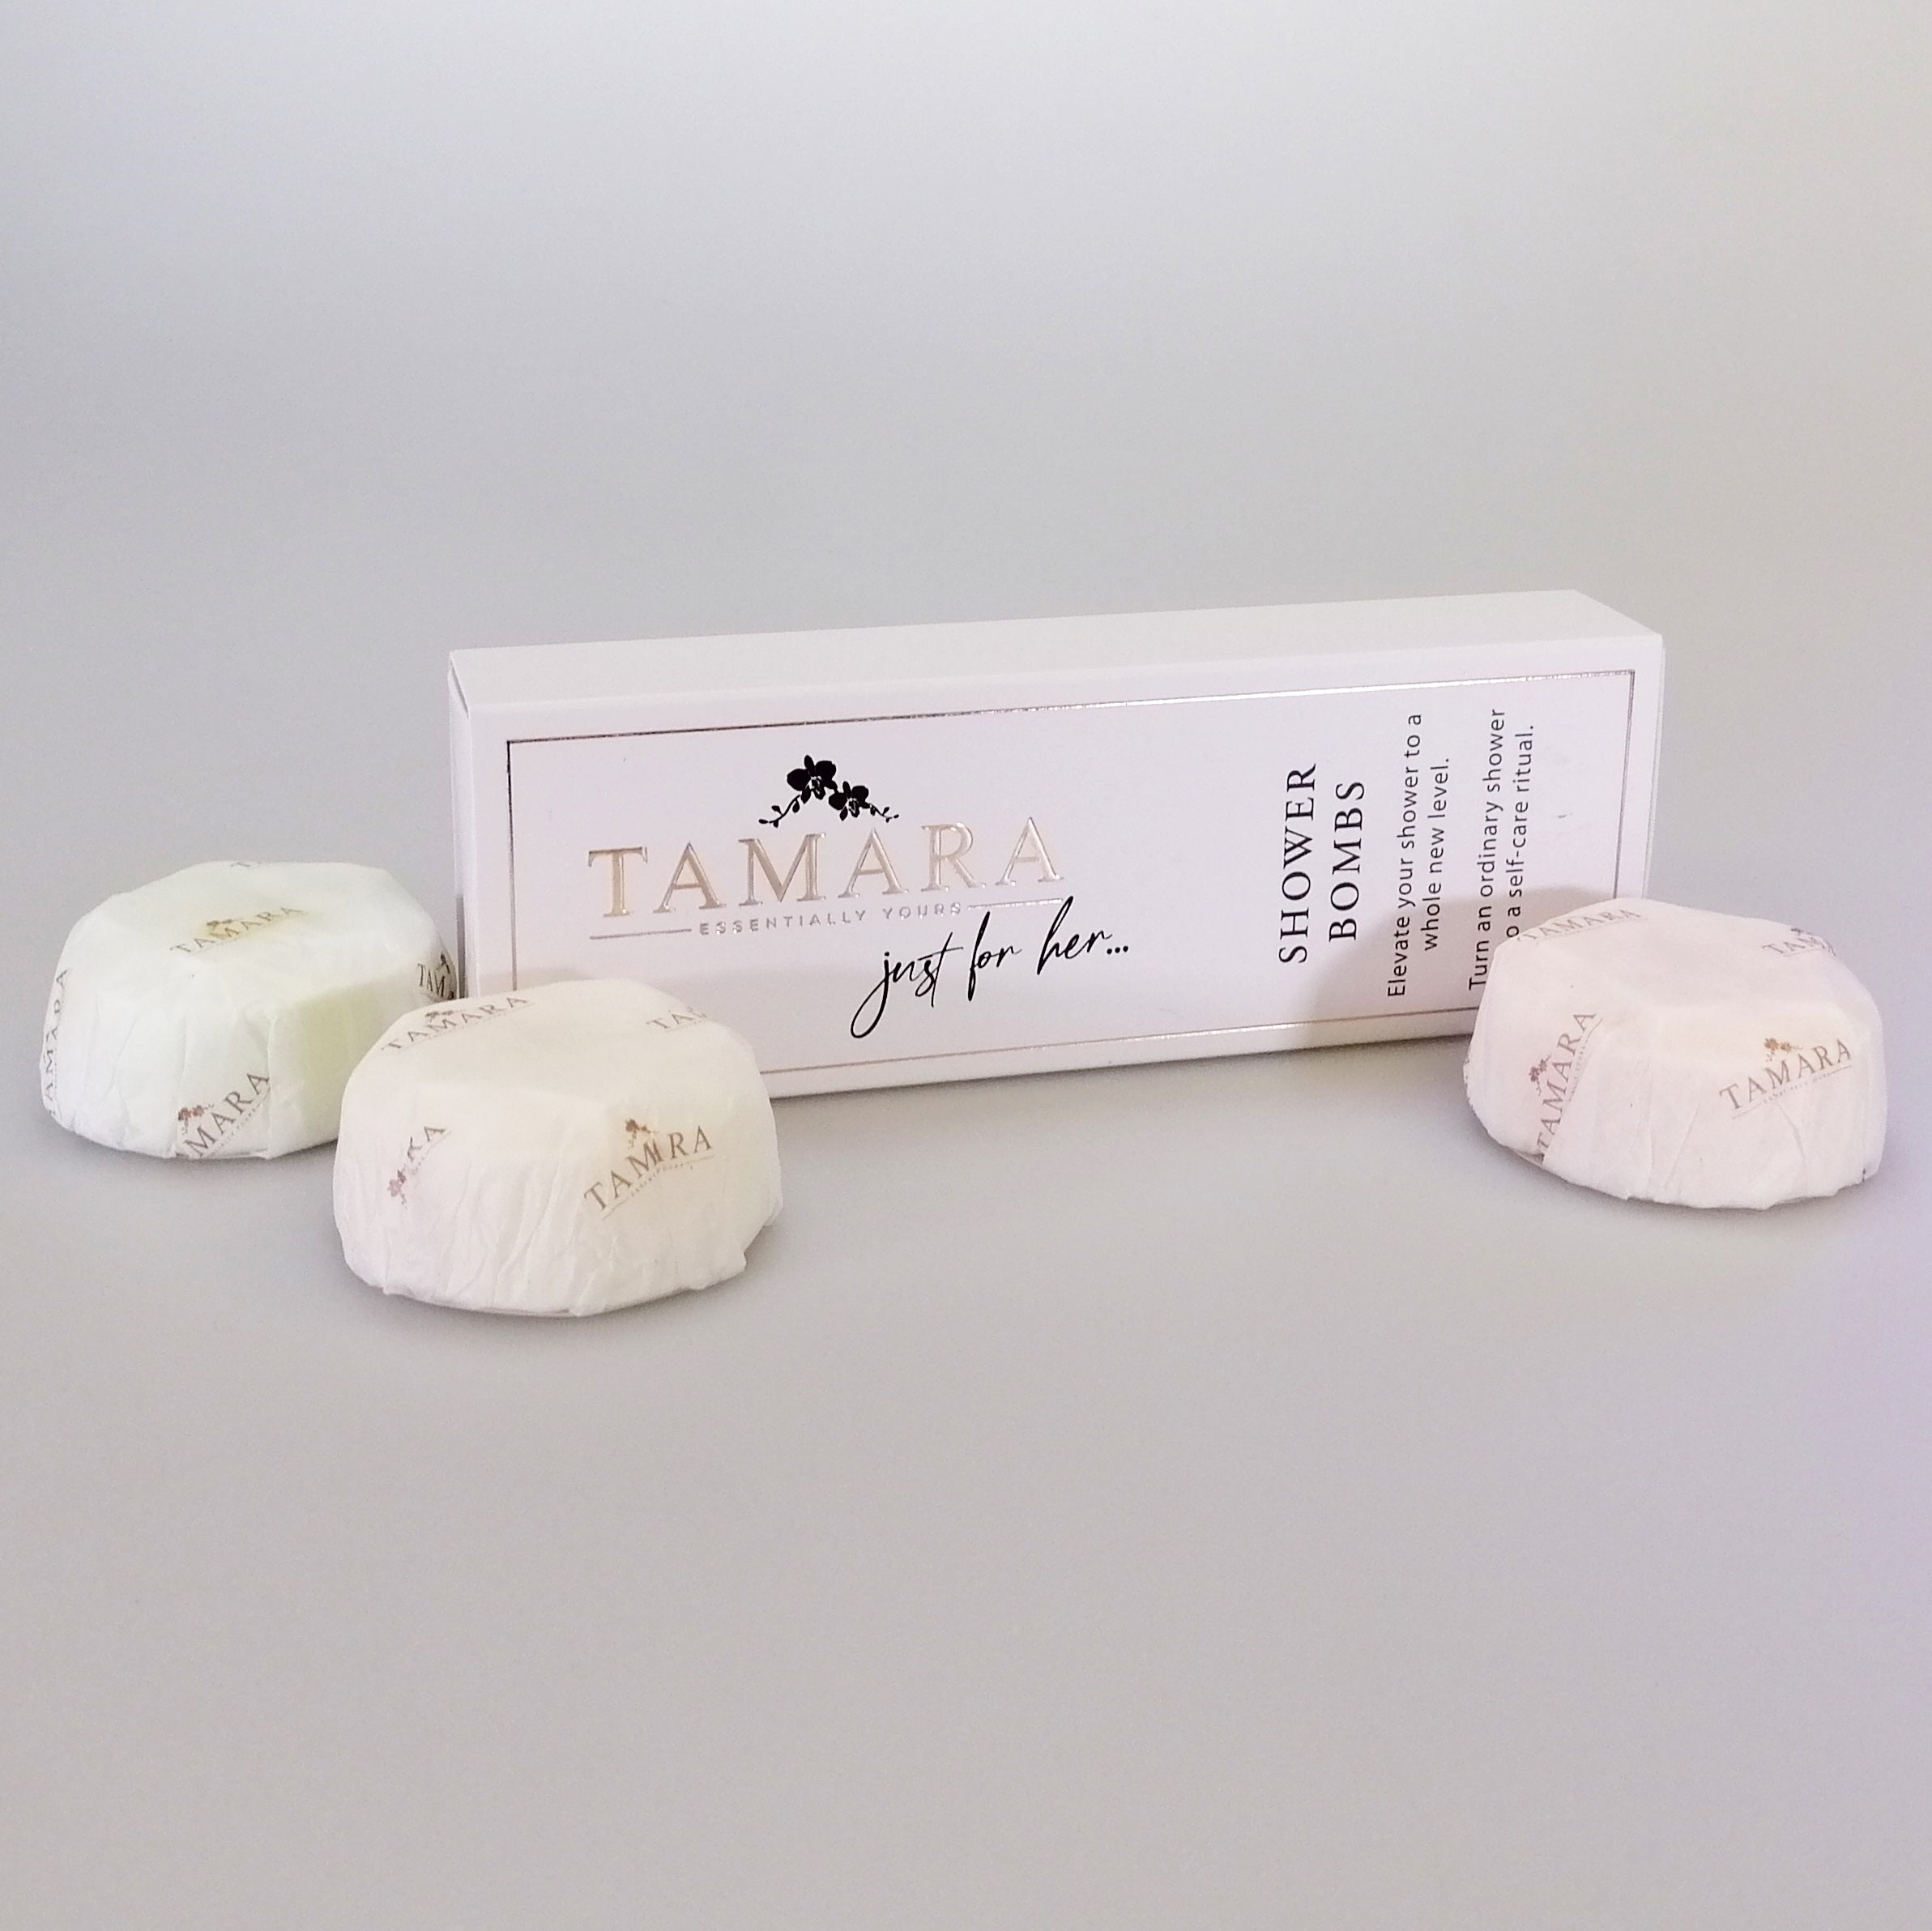 Tamara 'Just for Her' Aroma Shower Bombs - Pack of 3